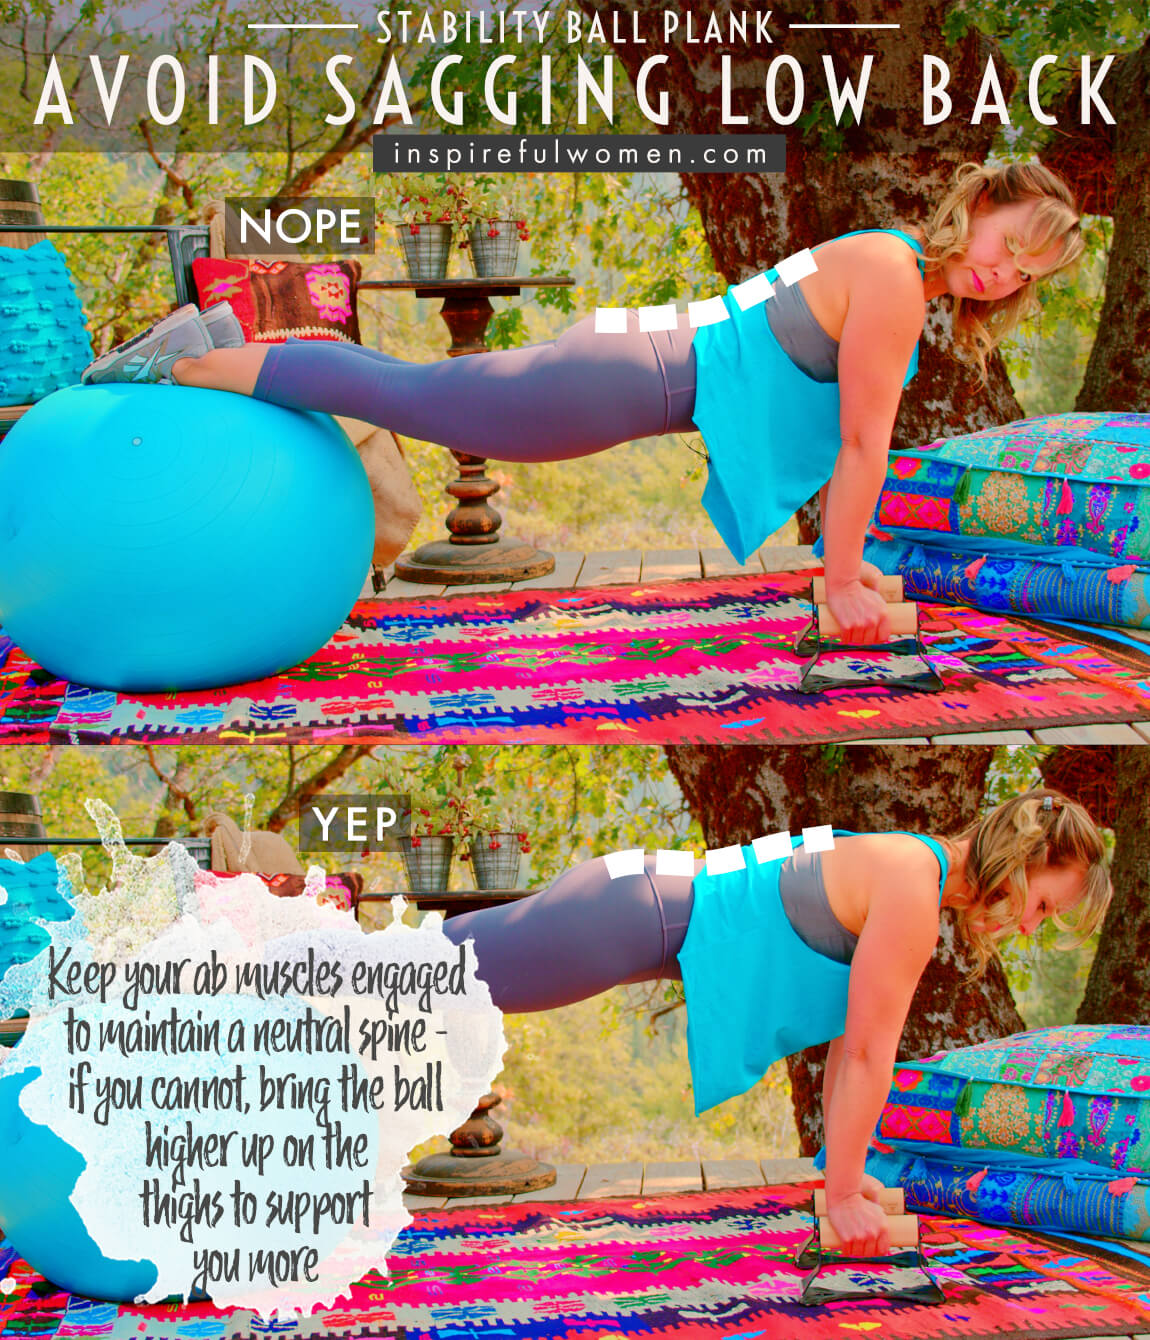 avoid-sagging-low-back-stability-ball-plank-prone-neutral-spine-core-exercise-common-mistakes